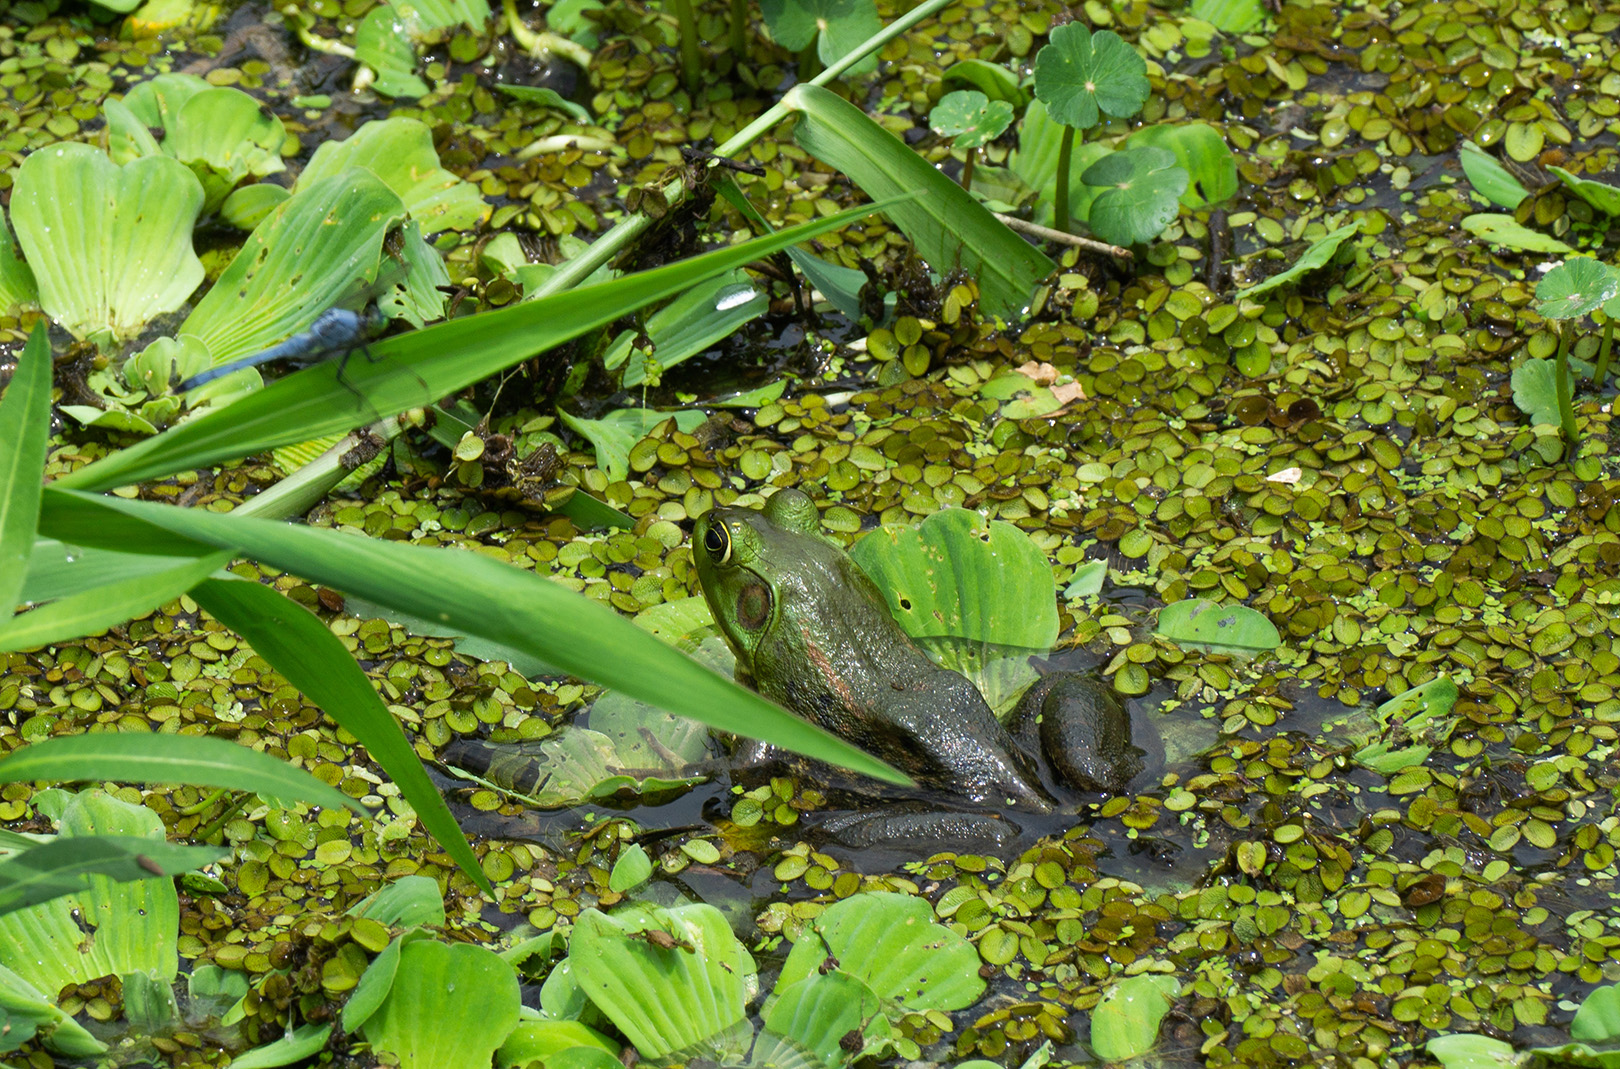 Frog sitting on plants in water